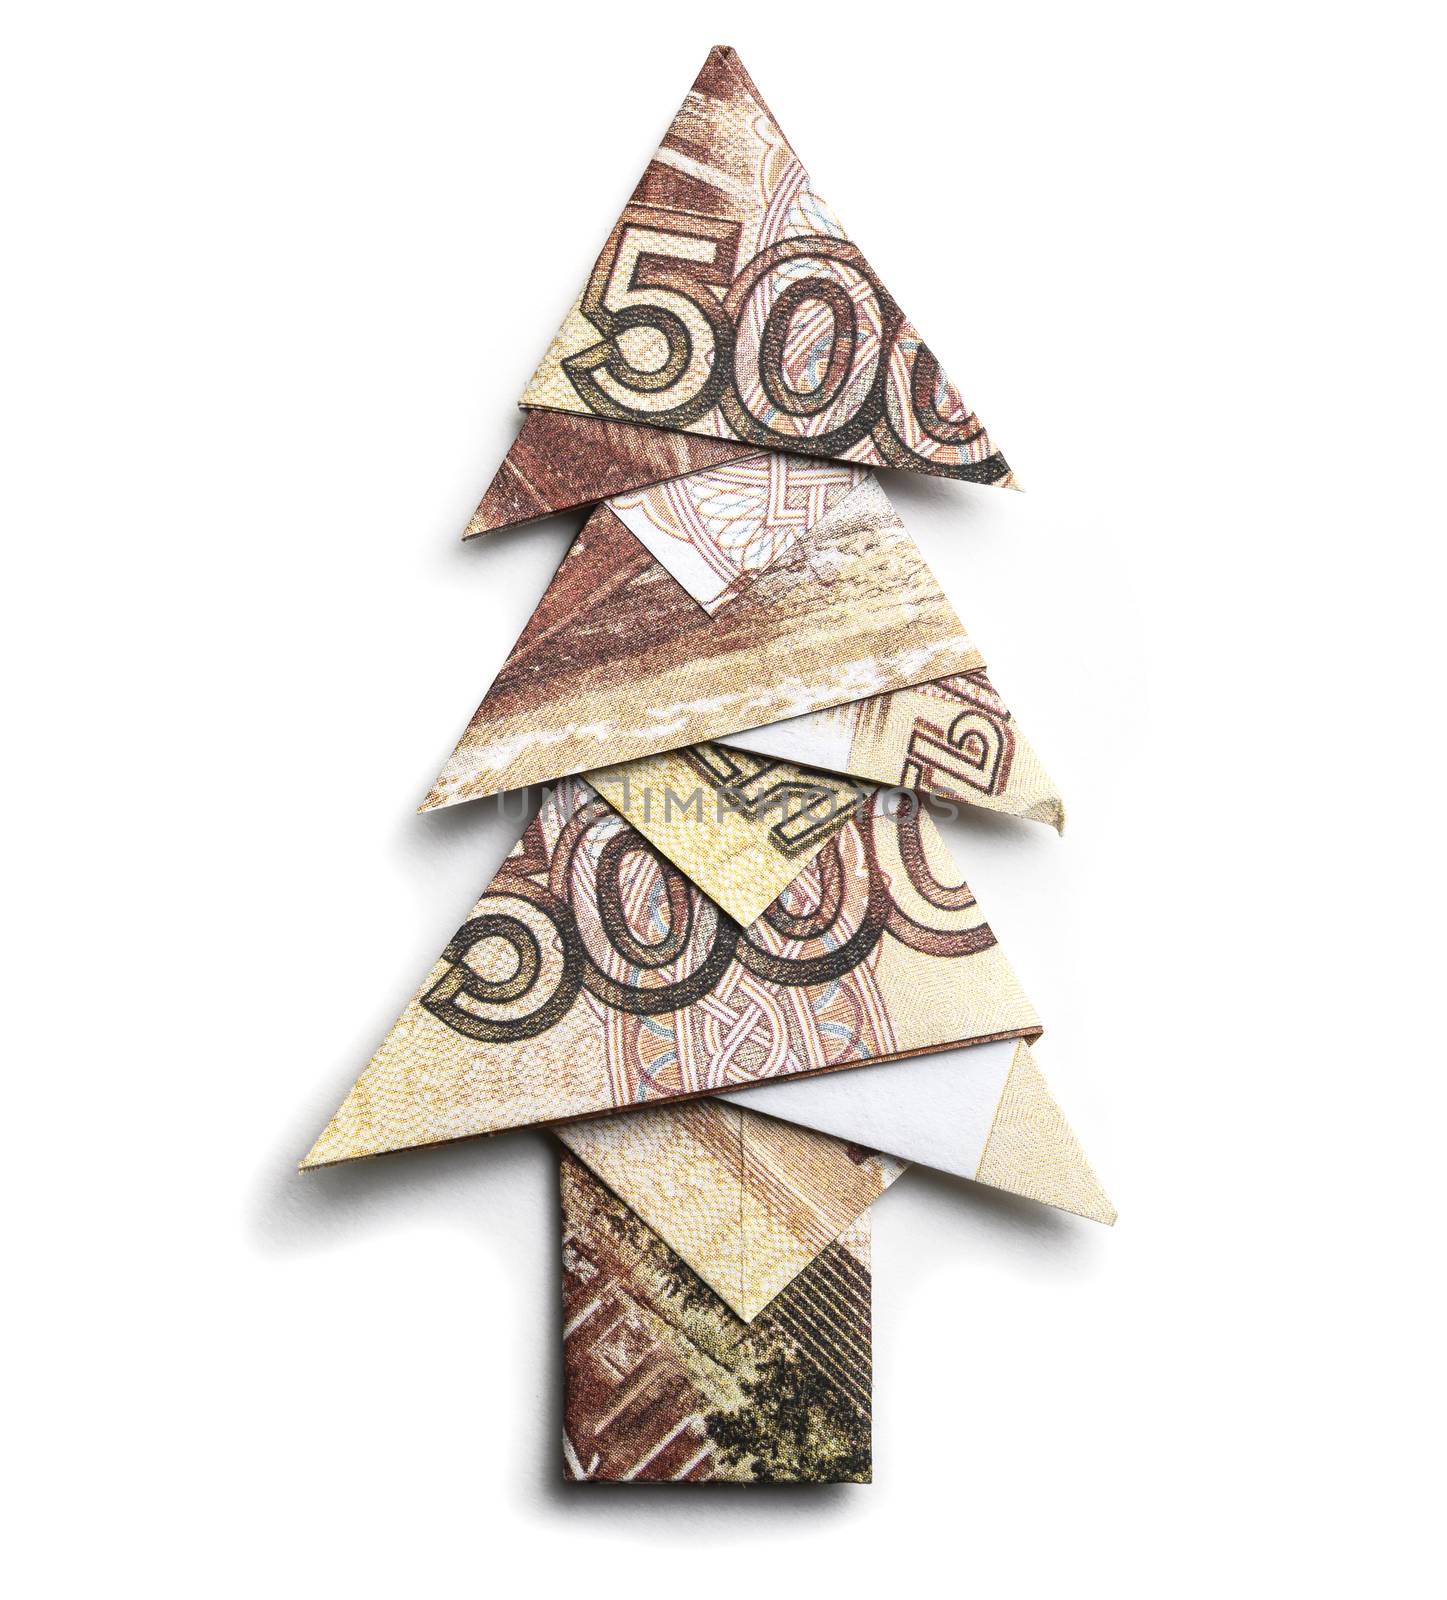 5000 Russian rubles in the form of a Christmas tree on a white background.